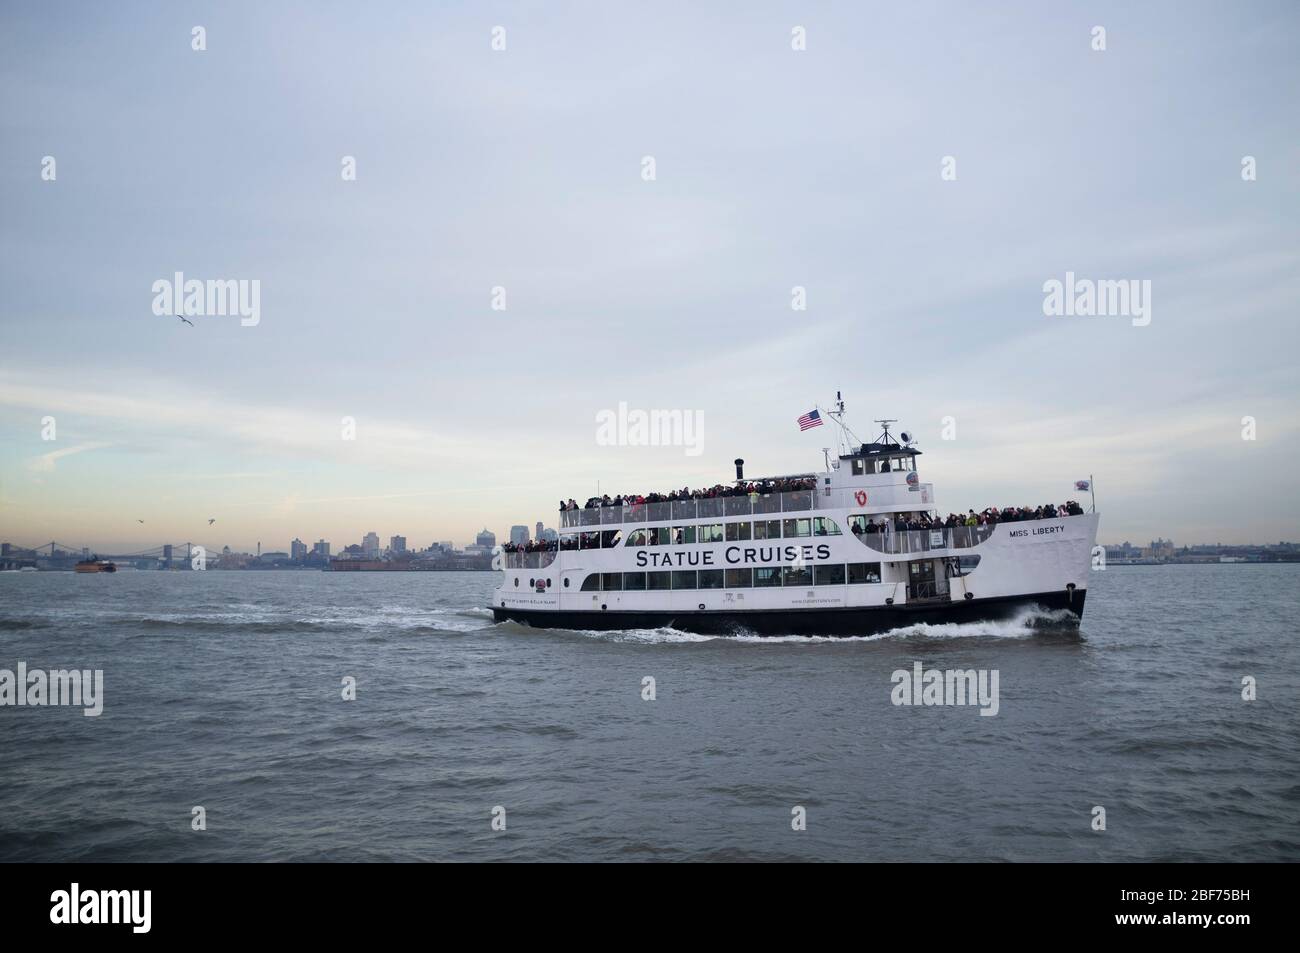 A boat going with tourist to The Statue of Liberty. 'Statue Cruises'. Full of tourists on a cloudy day. Stock Photo